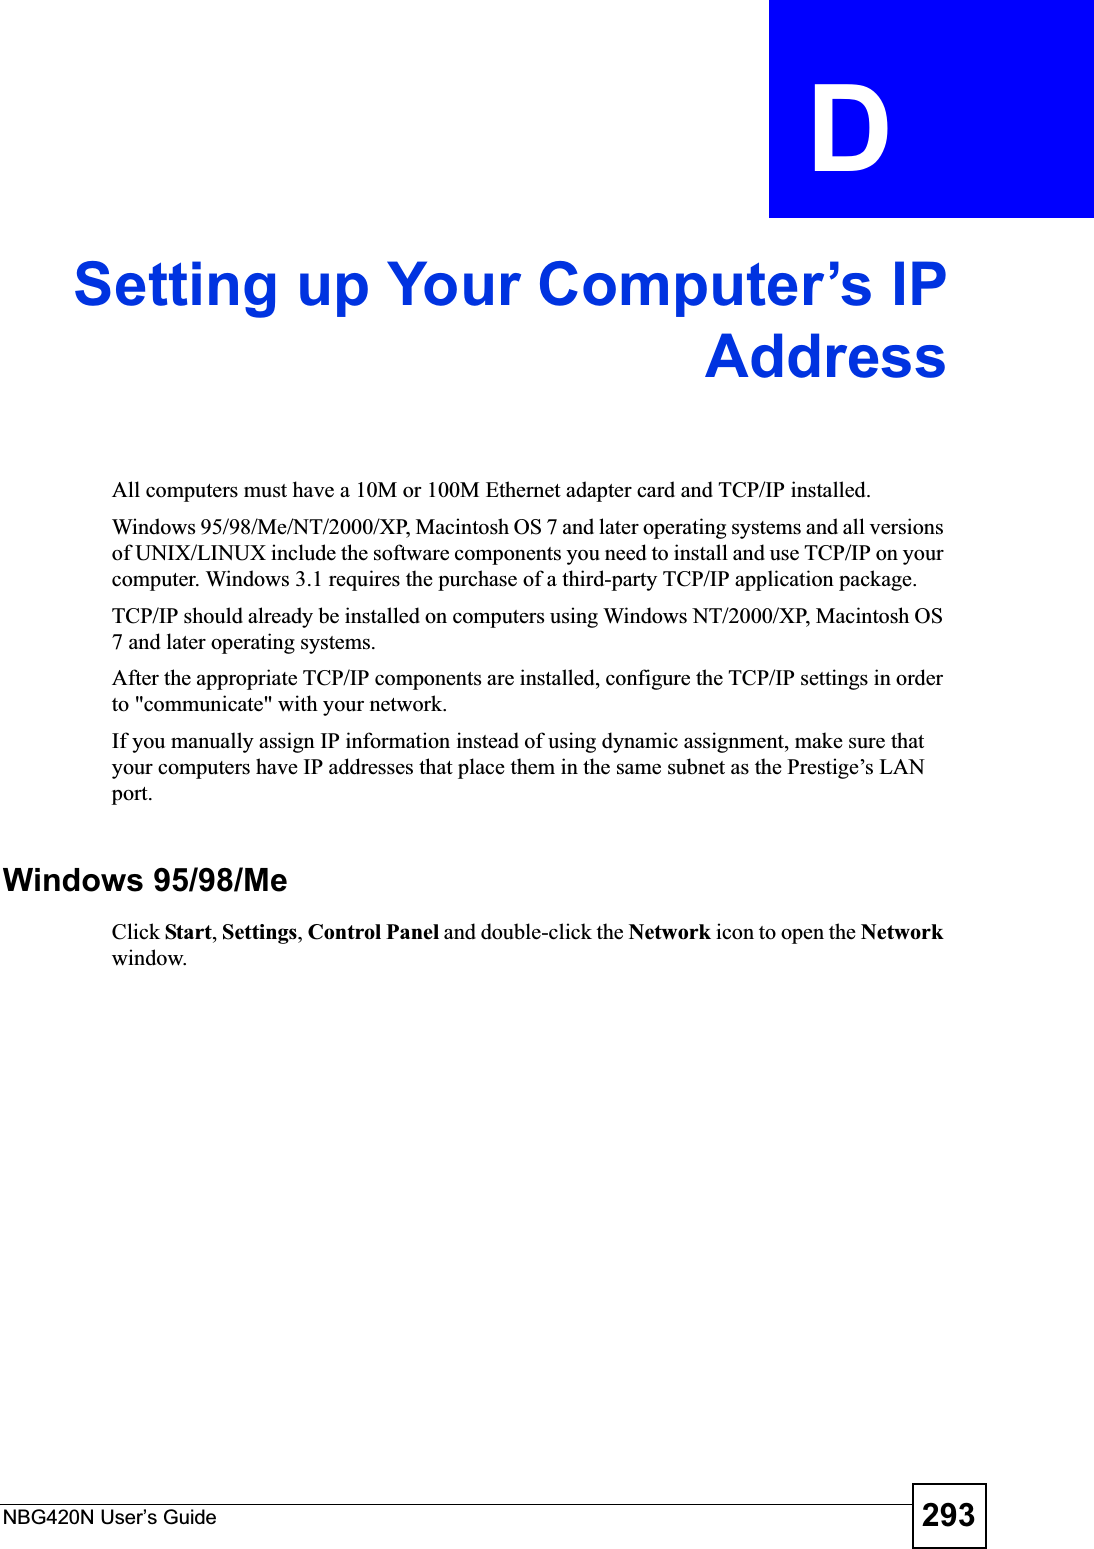 NBG420N User’s Guide 293APPENDIX  D Setting up Your Computer’s IPAddressAll computers must have a 10M or 100M Ethernet adapter card and TCP/IP installed. Windows 95/98/Me/NT/2000/XP, Macintosh OS 7 and later operating systems and all versions of UNIX/LINUX include the software components you need to install and use TCP/IP on your computer. Windows 3.1 requires the purchase of a third-party TCP/IP application package.TCP/IP should already be installed on computers using Windows NT/2000/XP, Macintosh OS 7 and later operating systems.After the appropriate TCP/IP components are installed, configure the TCP/IP settings in order to &quot;communicate&quot; with your network. If you manually assign IP information instead of using dynamic assignment, make sure that your computers have IP addresses that place them in the same subnet as the Prestige’s LAN port.Windows 95/98/MeClick Start,Settings,Control Panel and double-click the Network icon to open the Network window.